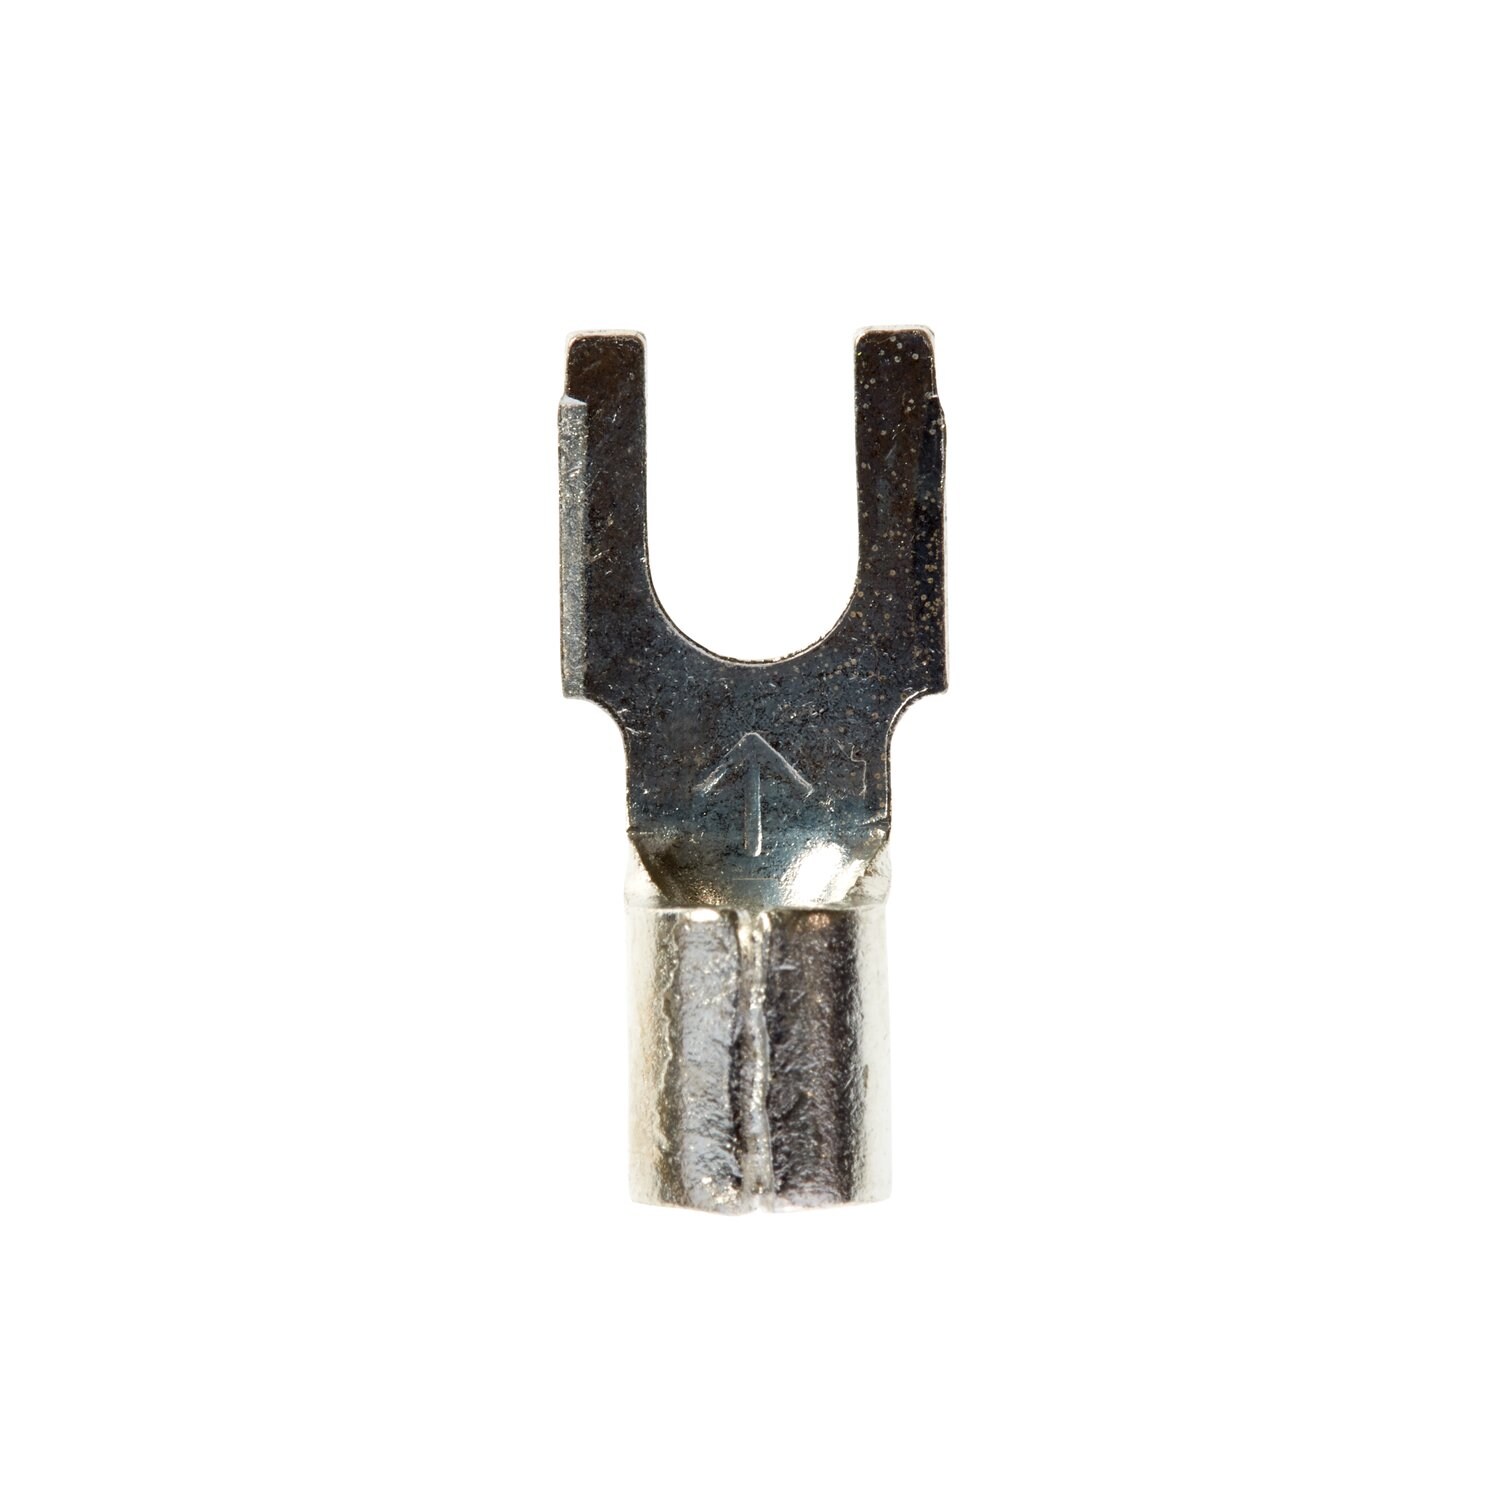 7100164111 - 3M Scotchlok Block Fork, Non-Insulated Brazed Seam M10-8FBK, Stud Size
8, suitable for use in a terminal block, 500/Case